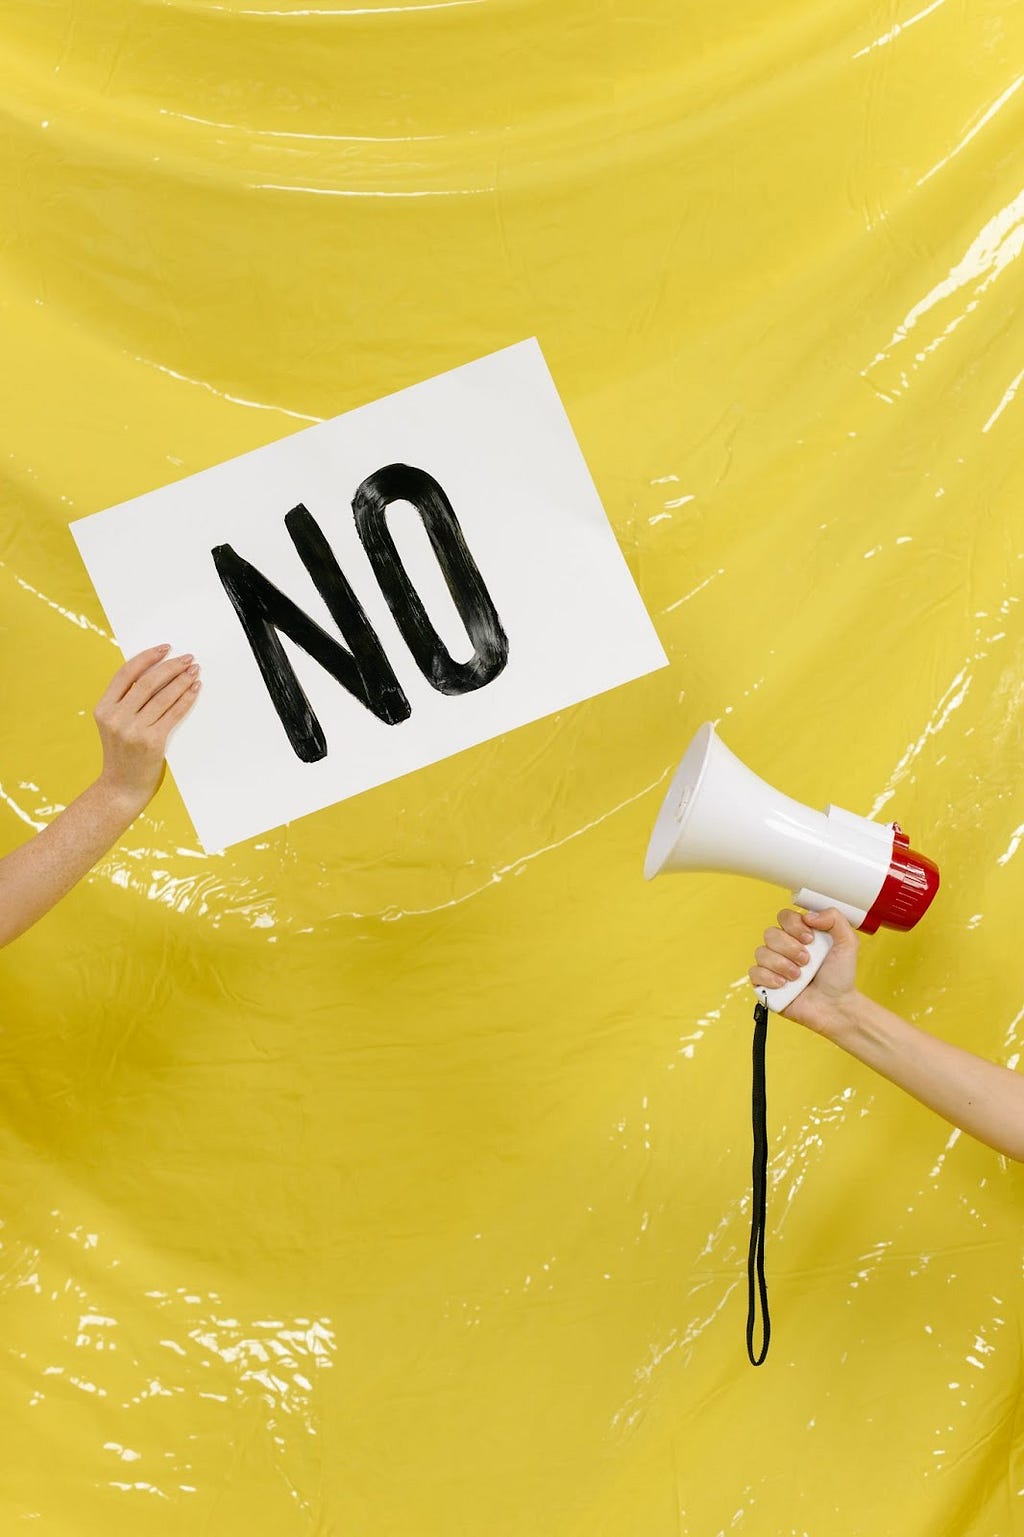 Hands of two individuals on a yellow background: one hand is holding a microphone and the other one is holding a banner written “no” on it in capital letters.